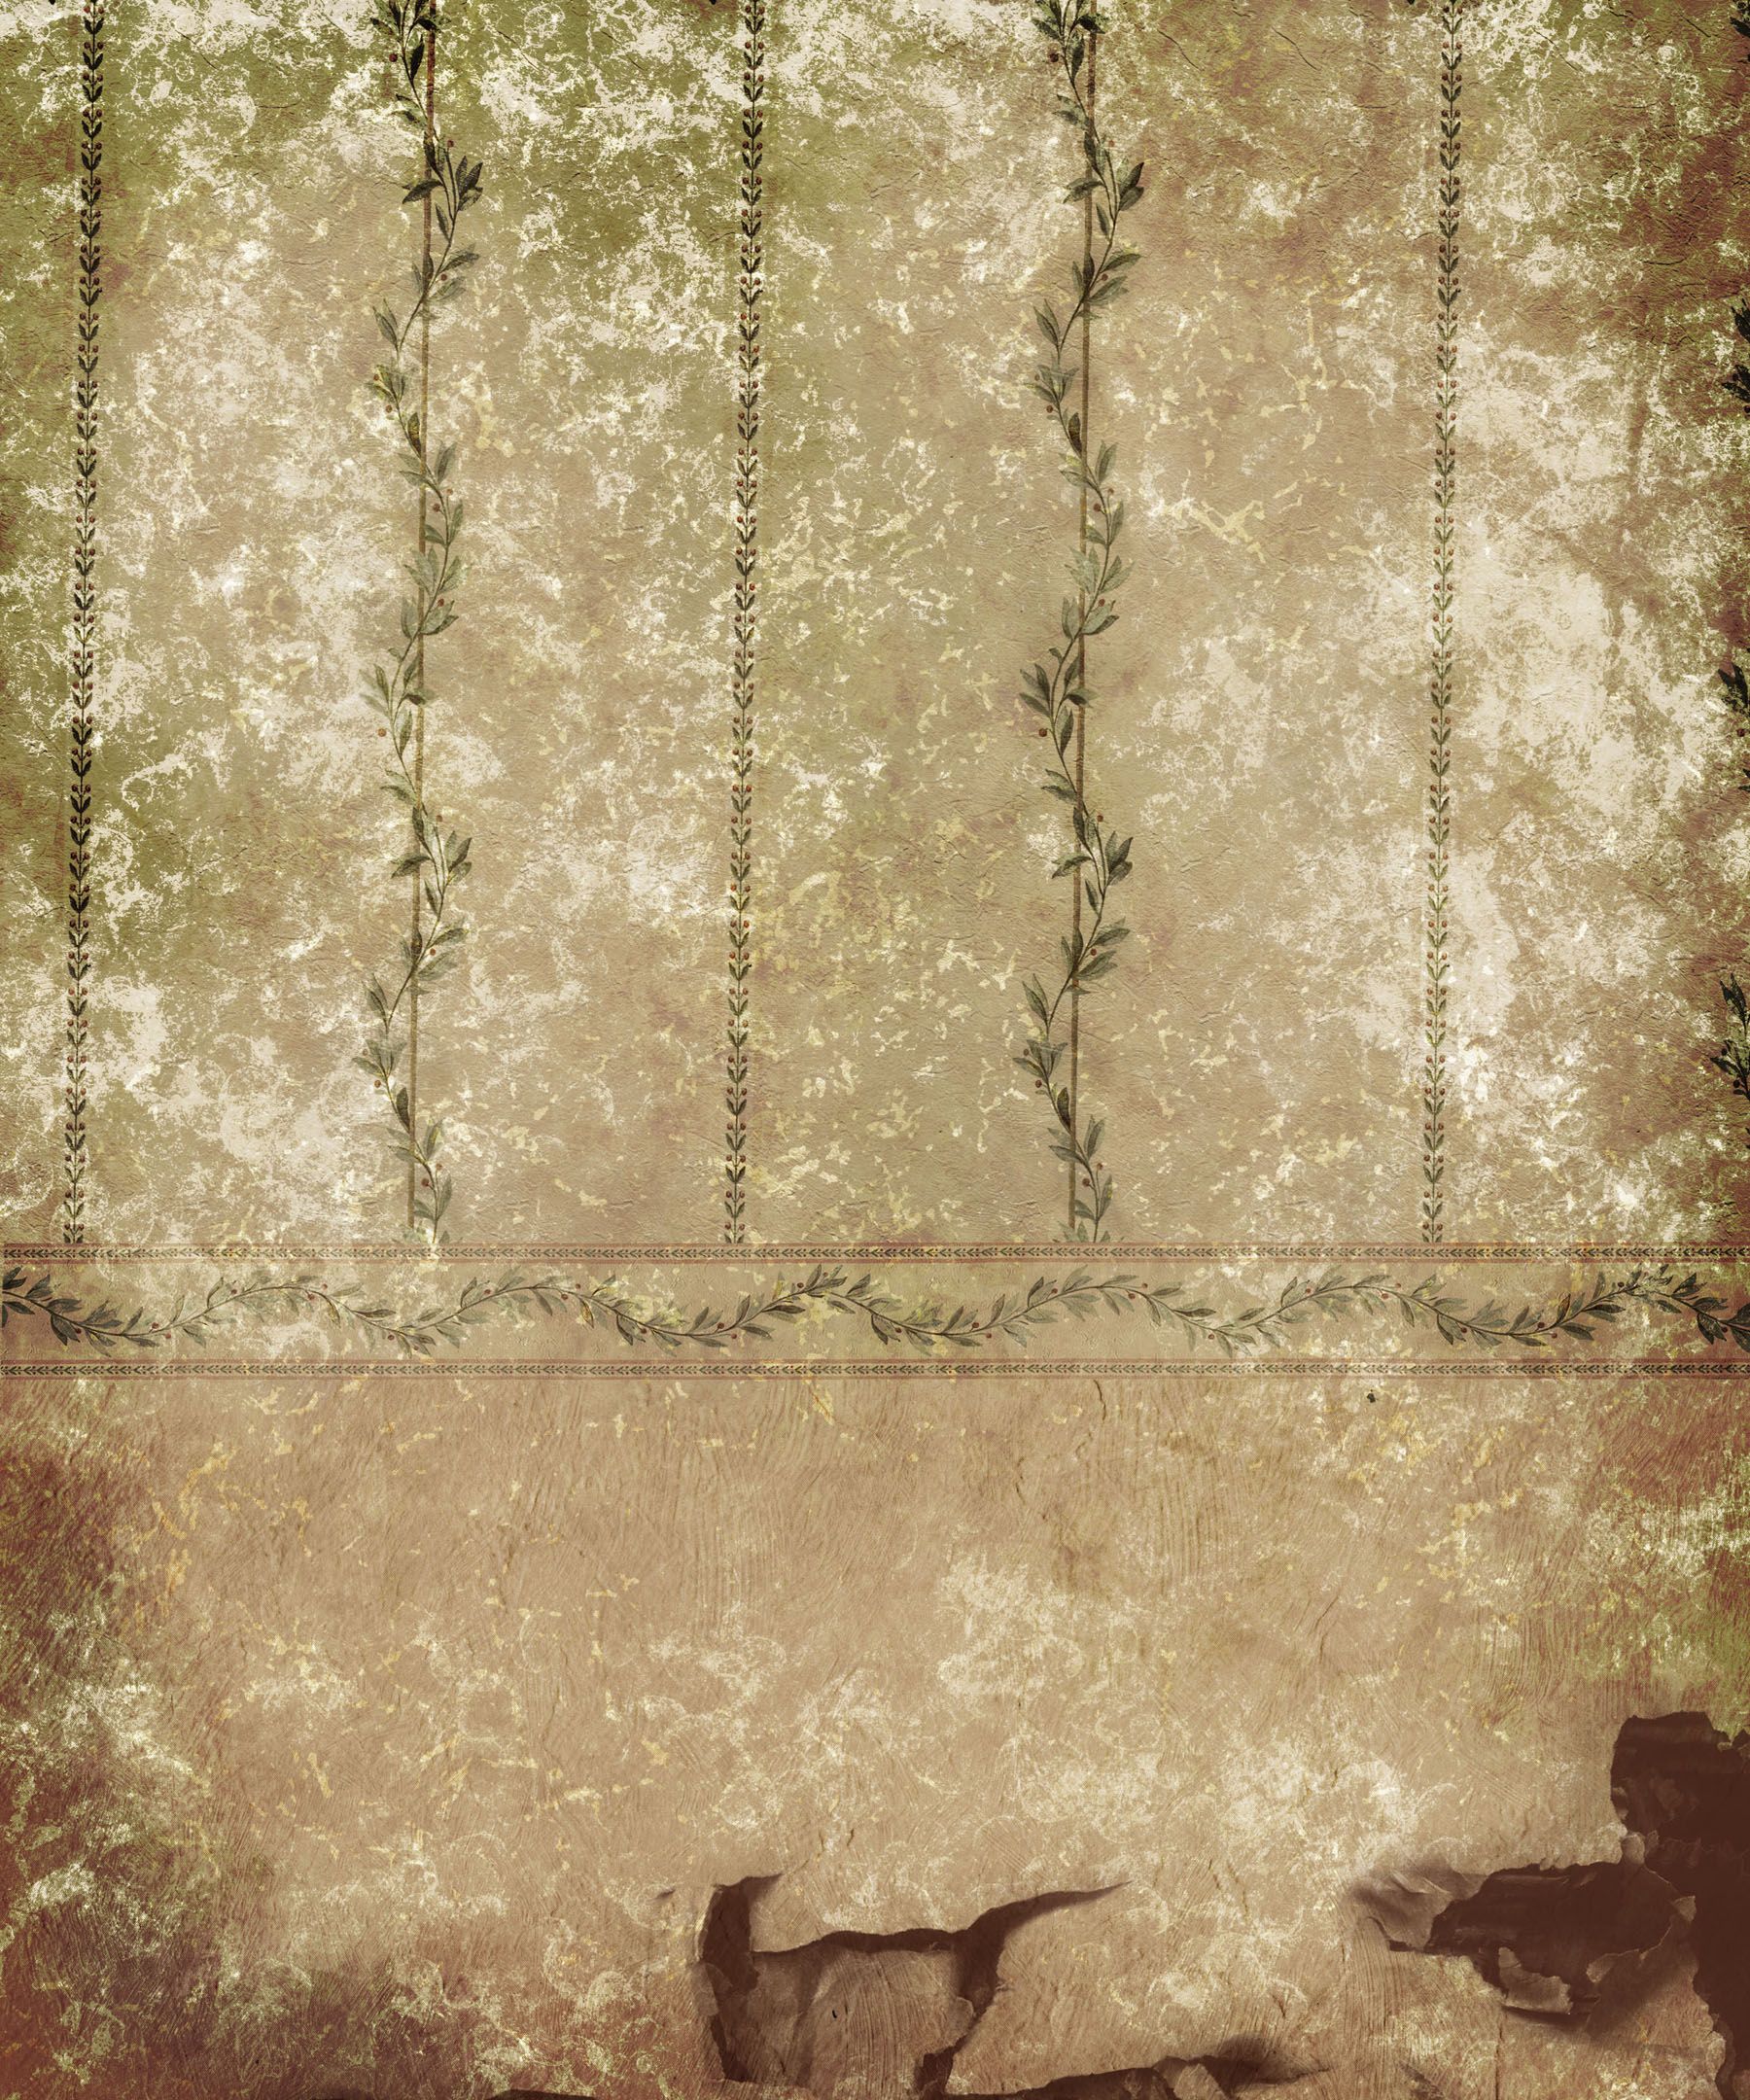 Old European-style wall wallpaper 12536 - Background patterns - Others